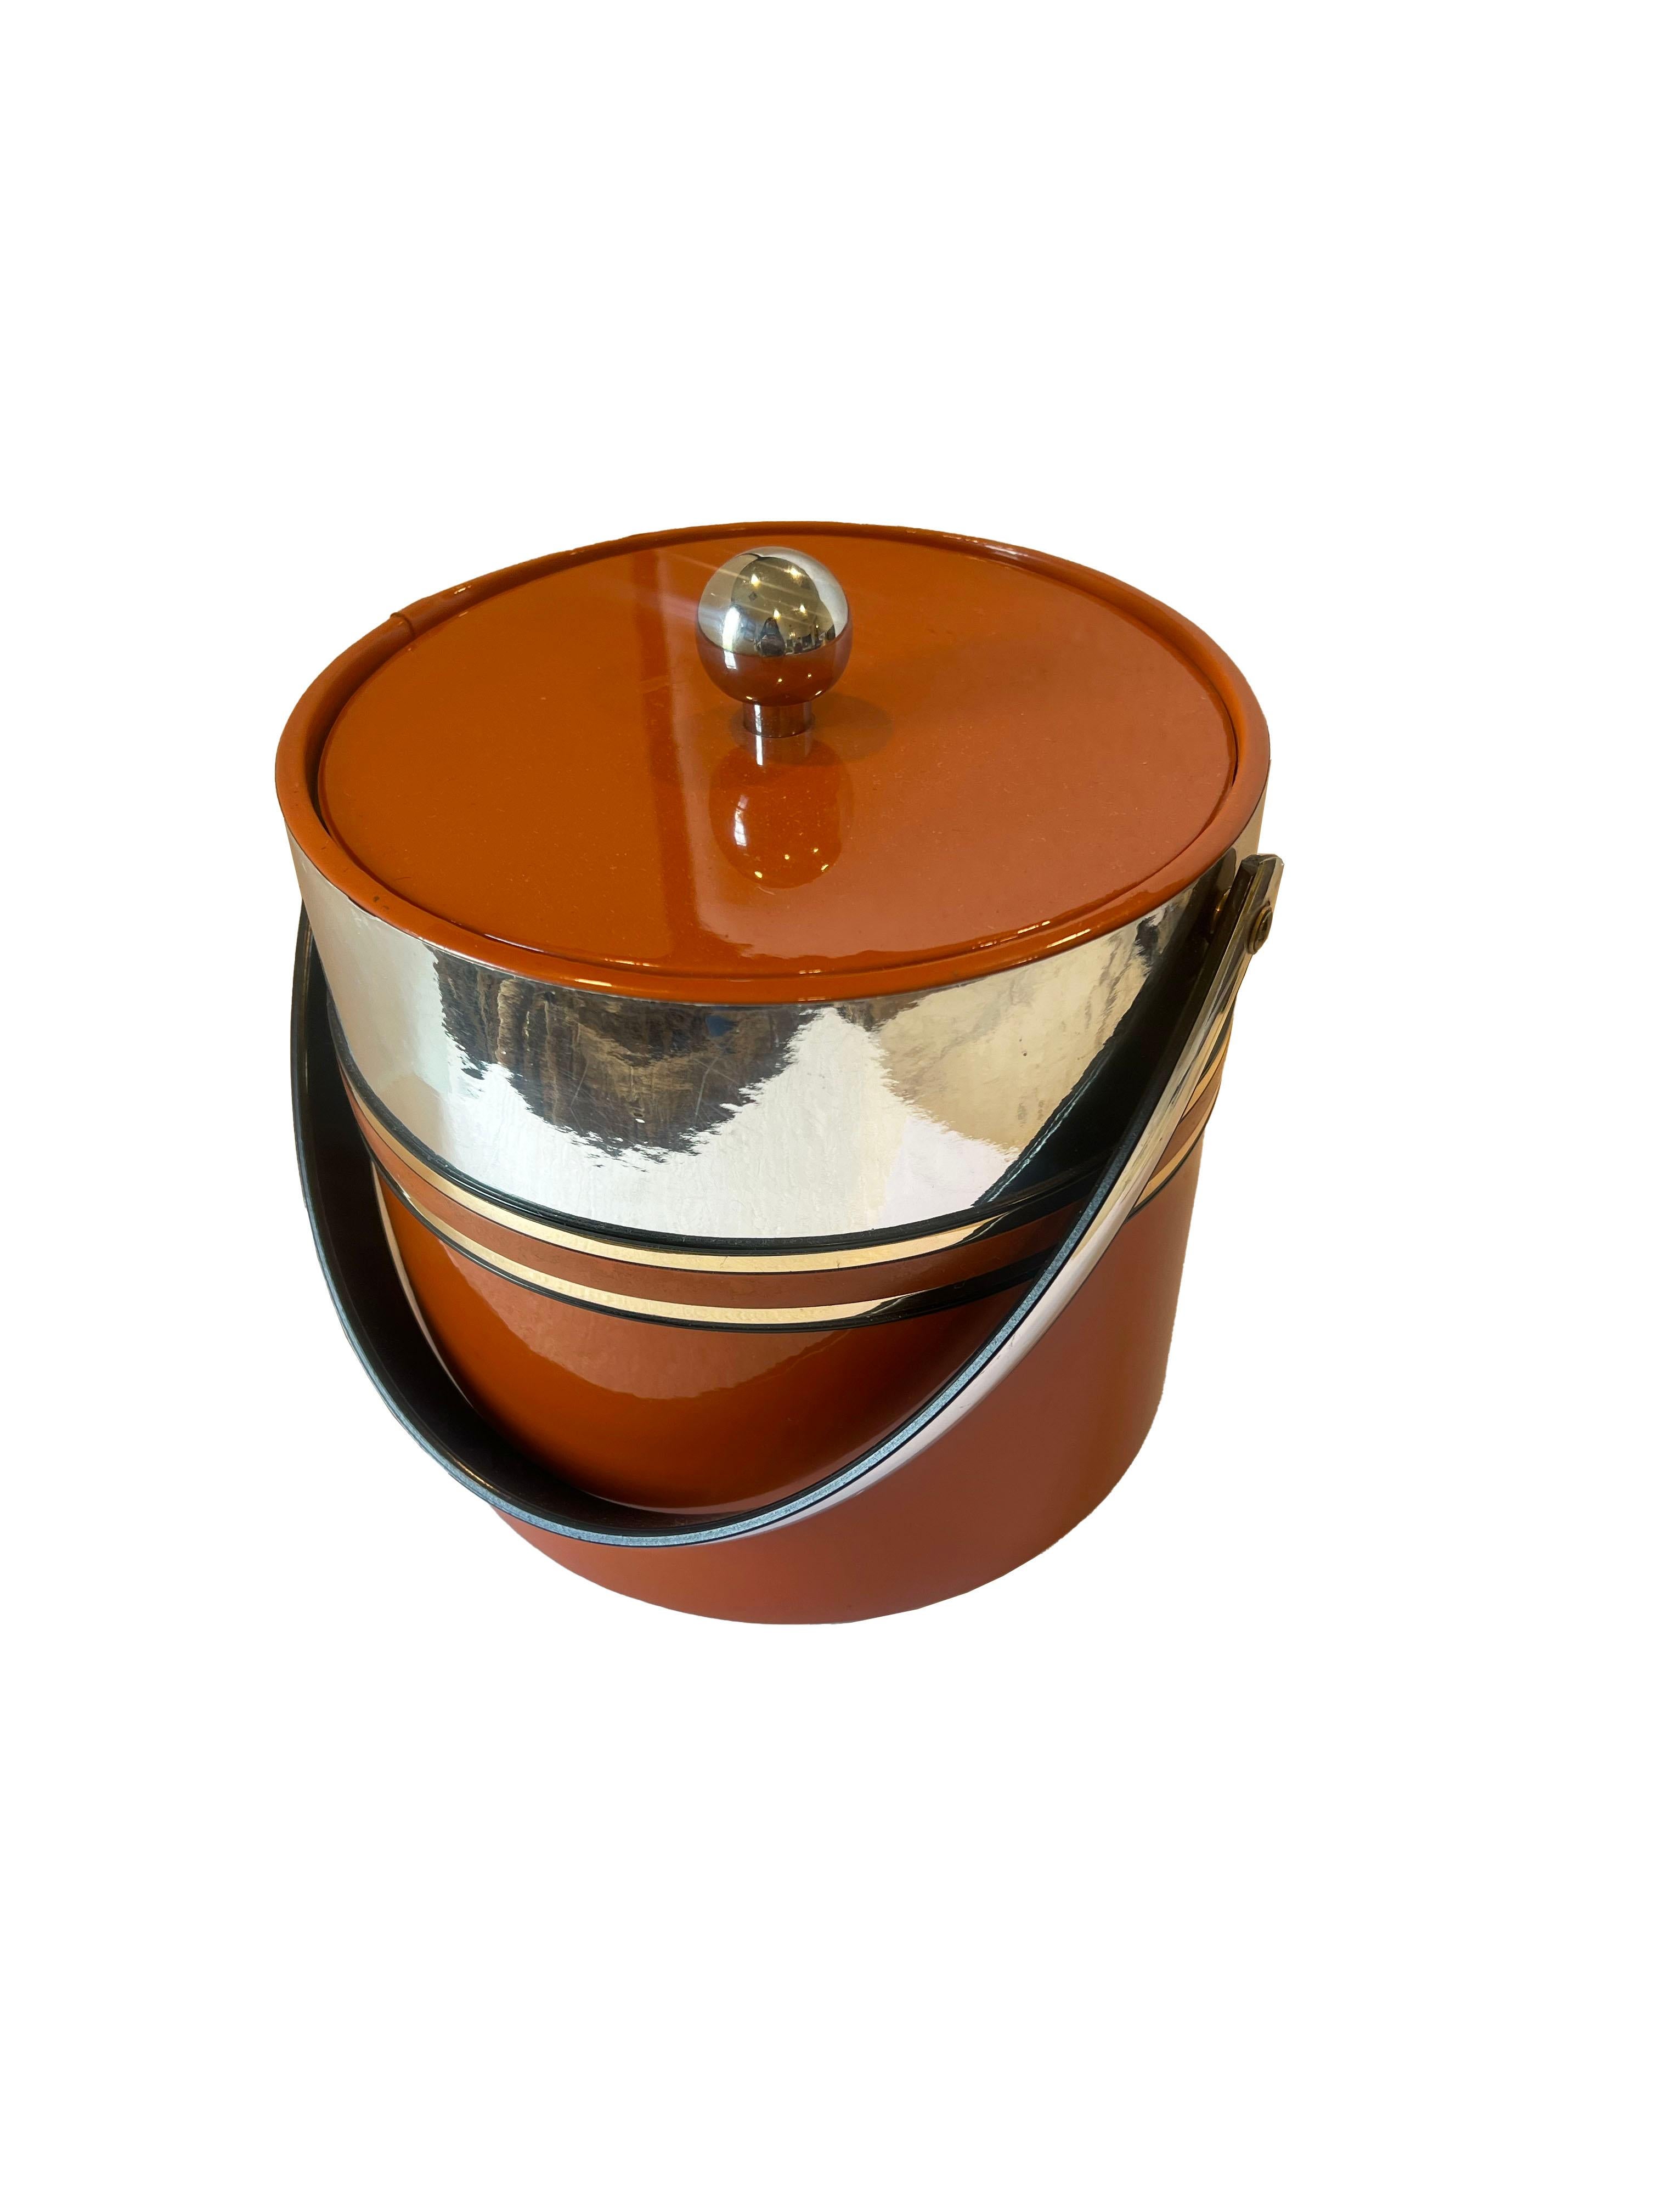 An exquisite vintage Hermes style ice bucket that combines aesthetic appeal & functionality. This piece boasts a vibrant orange color, infusing a pop of retro charm into any setting and is embellished with gold and silver accents. The addition of a